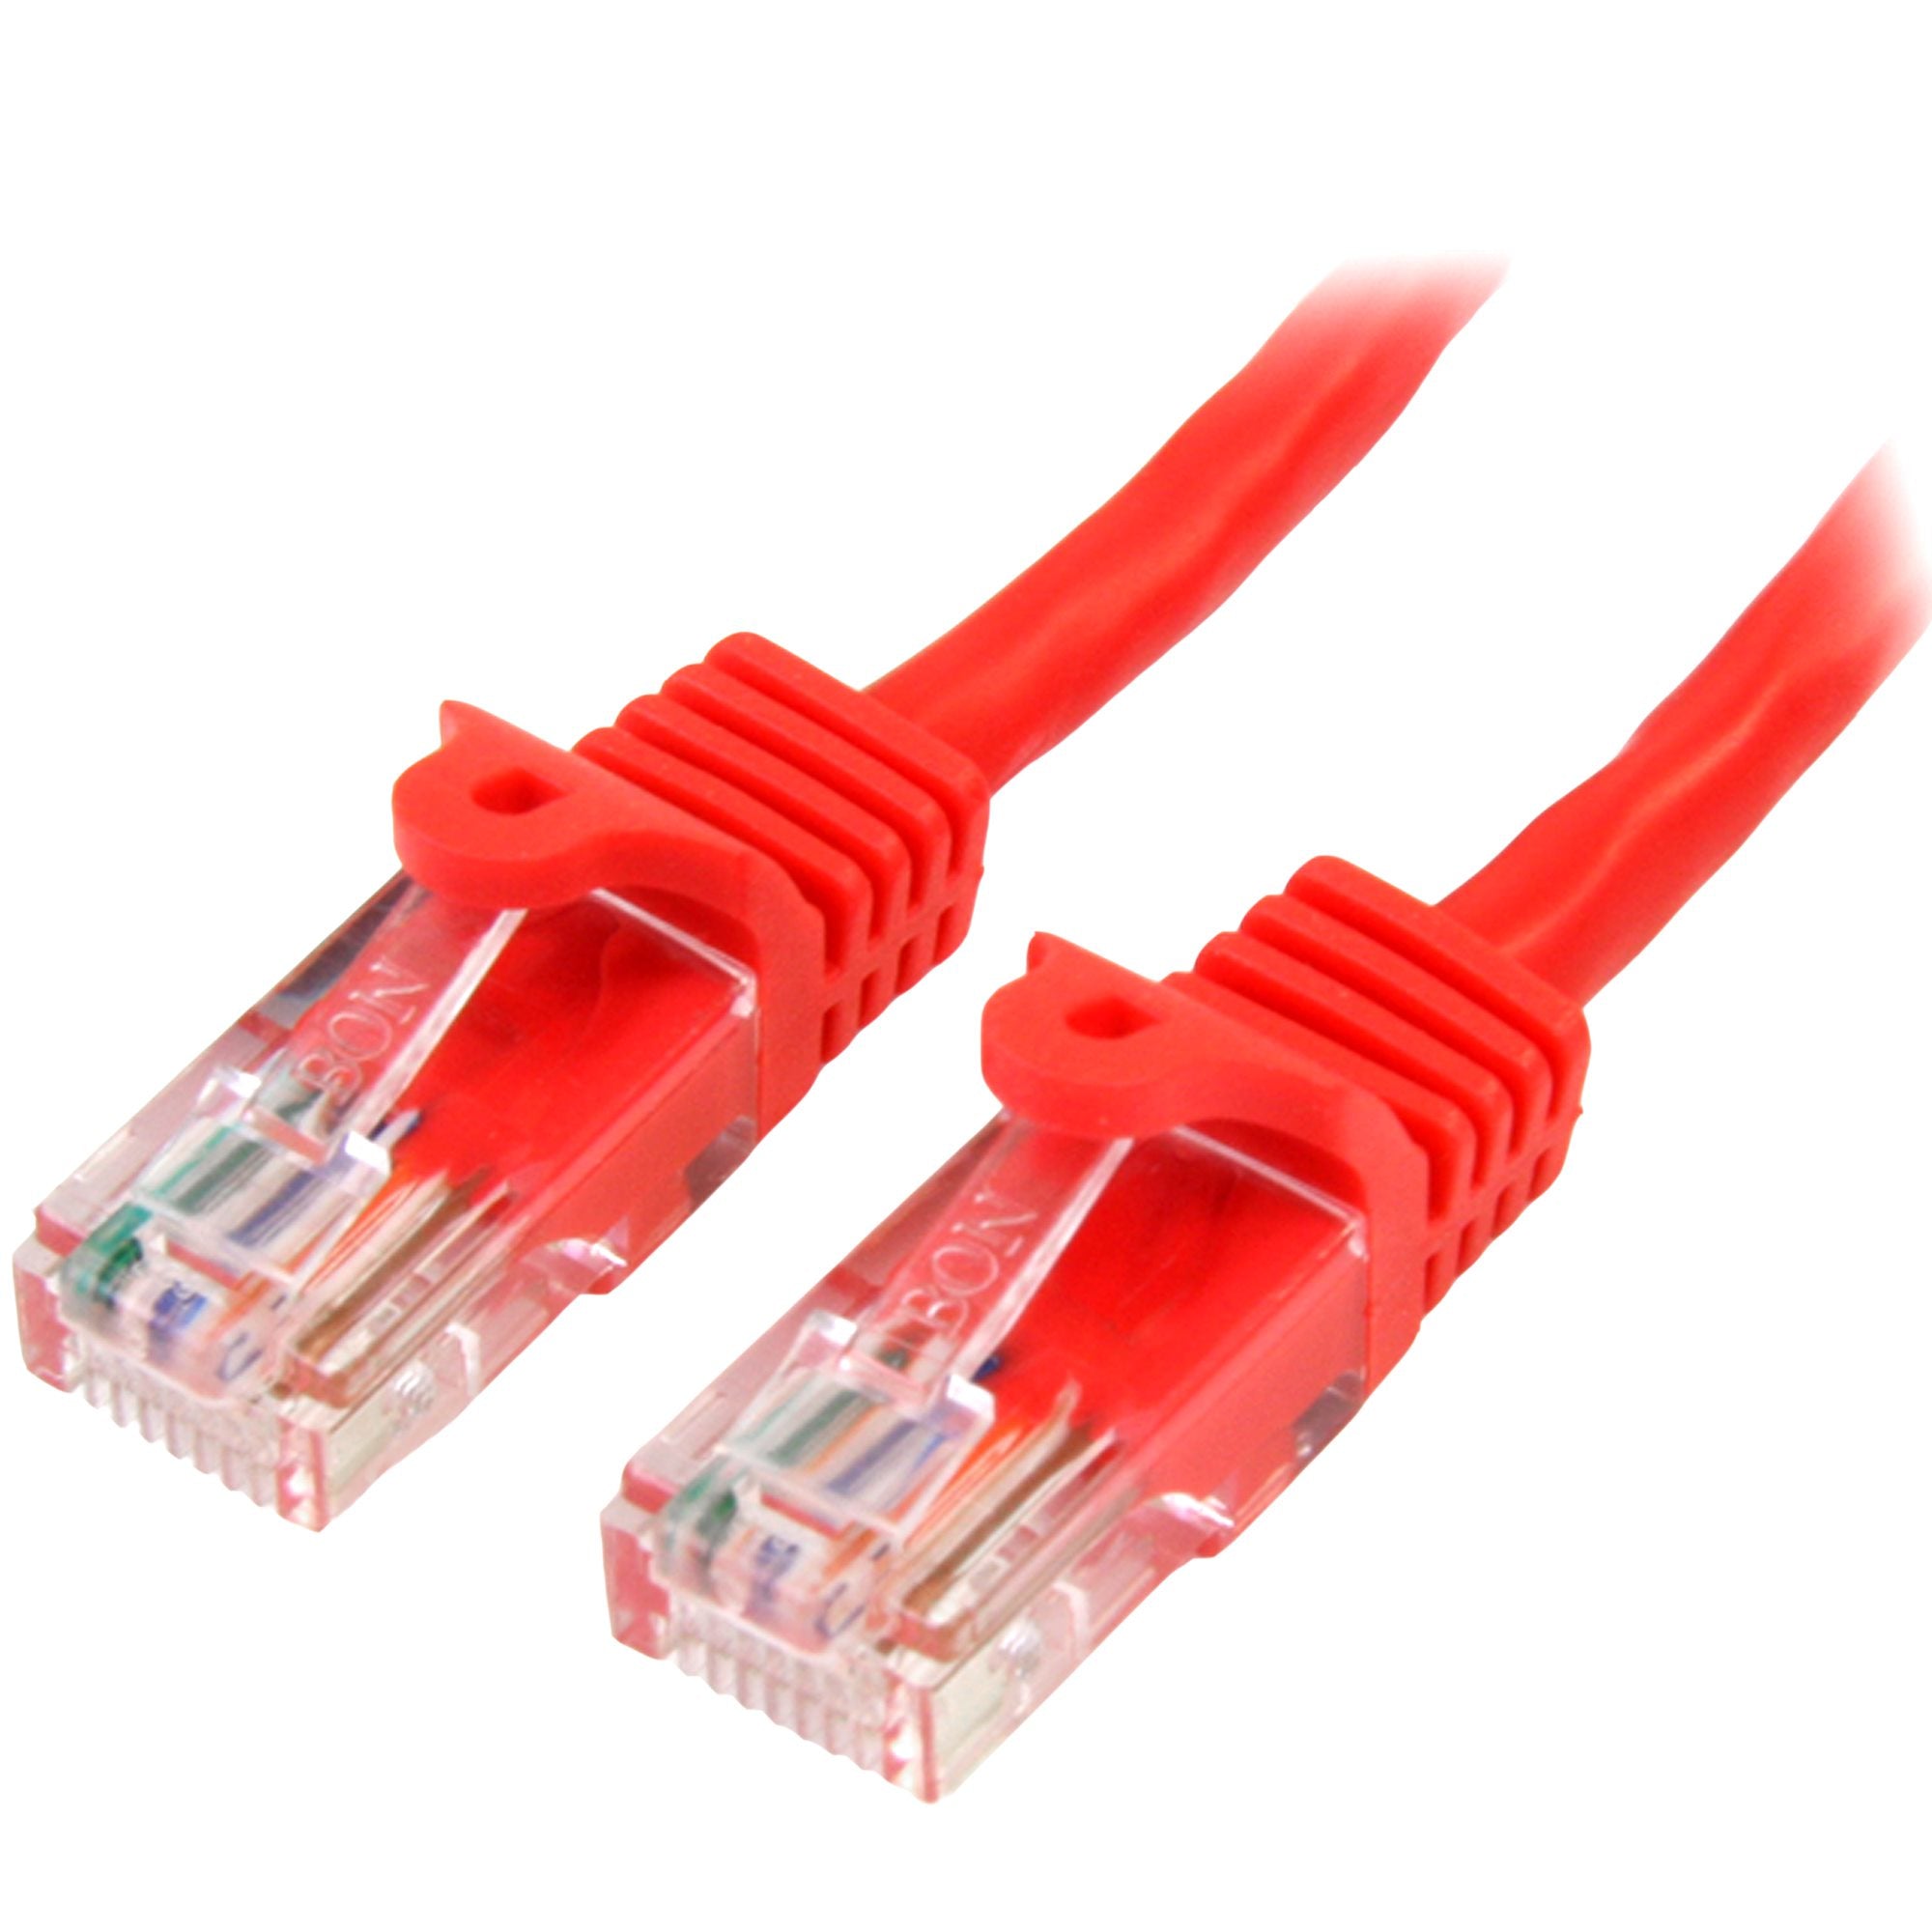 StarTech.com Cat5e Patch Cable with Snagless RJ45 Connectors - 1m, Red